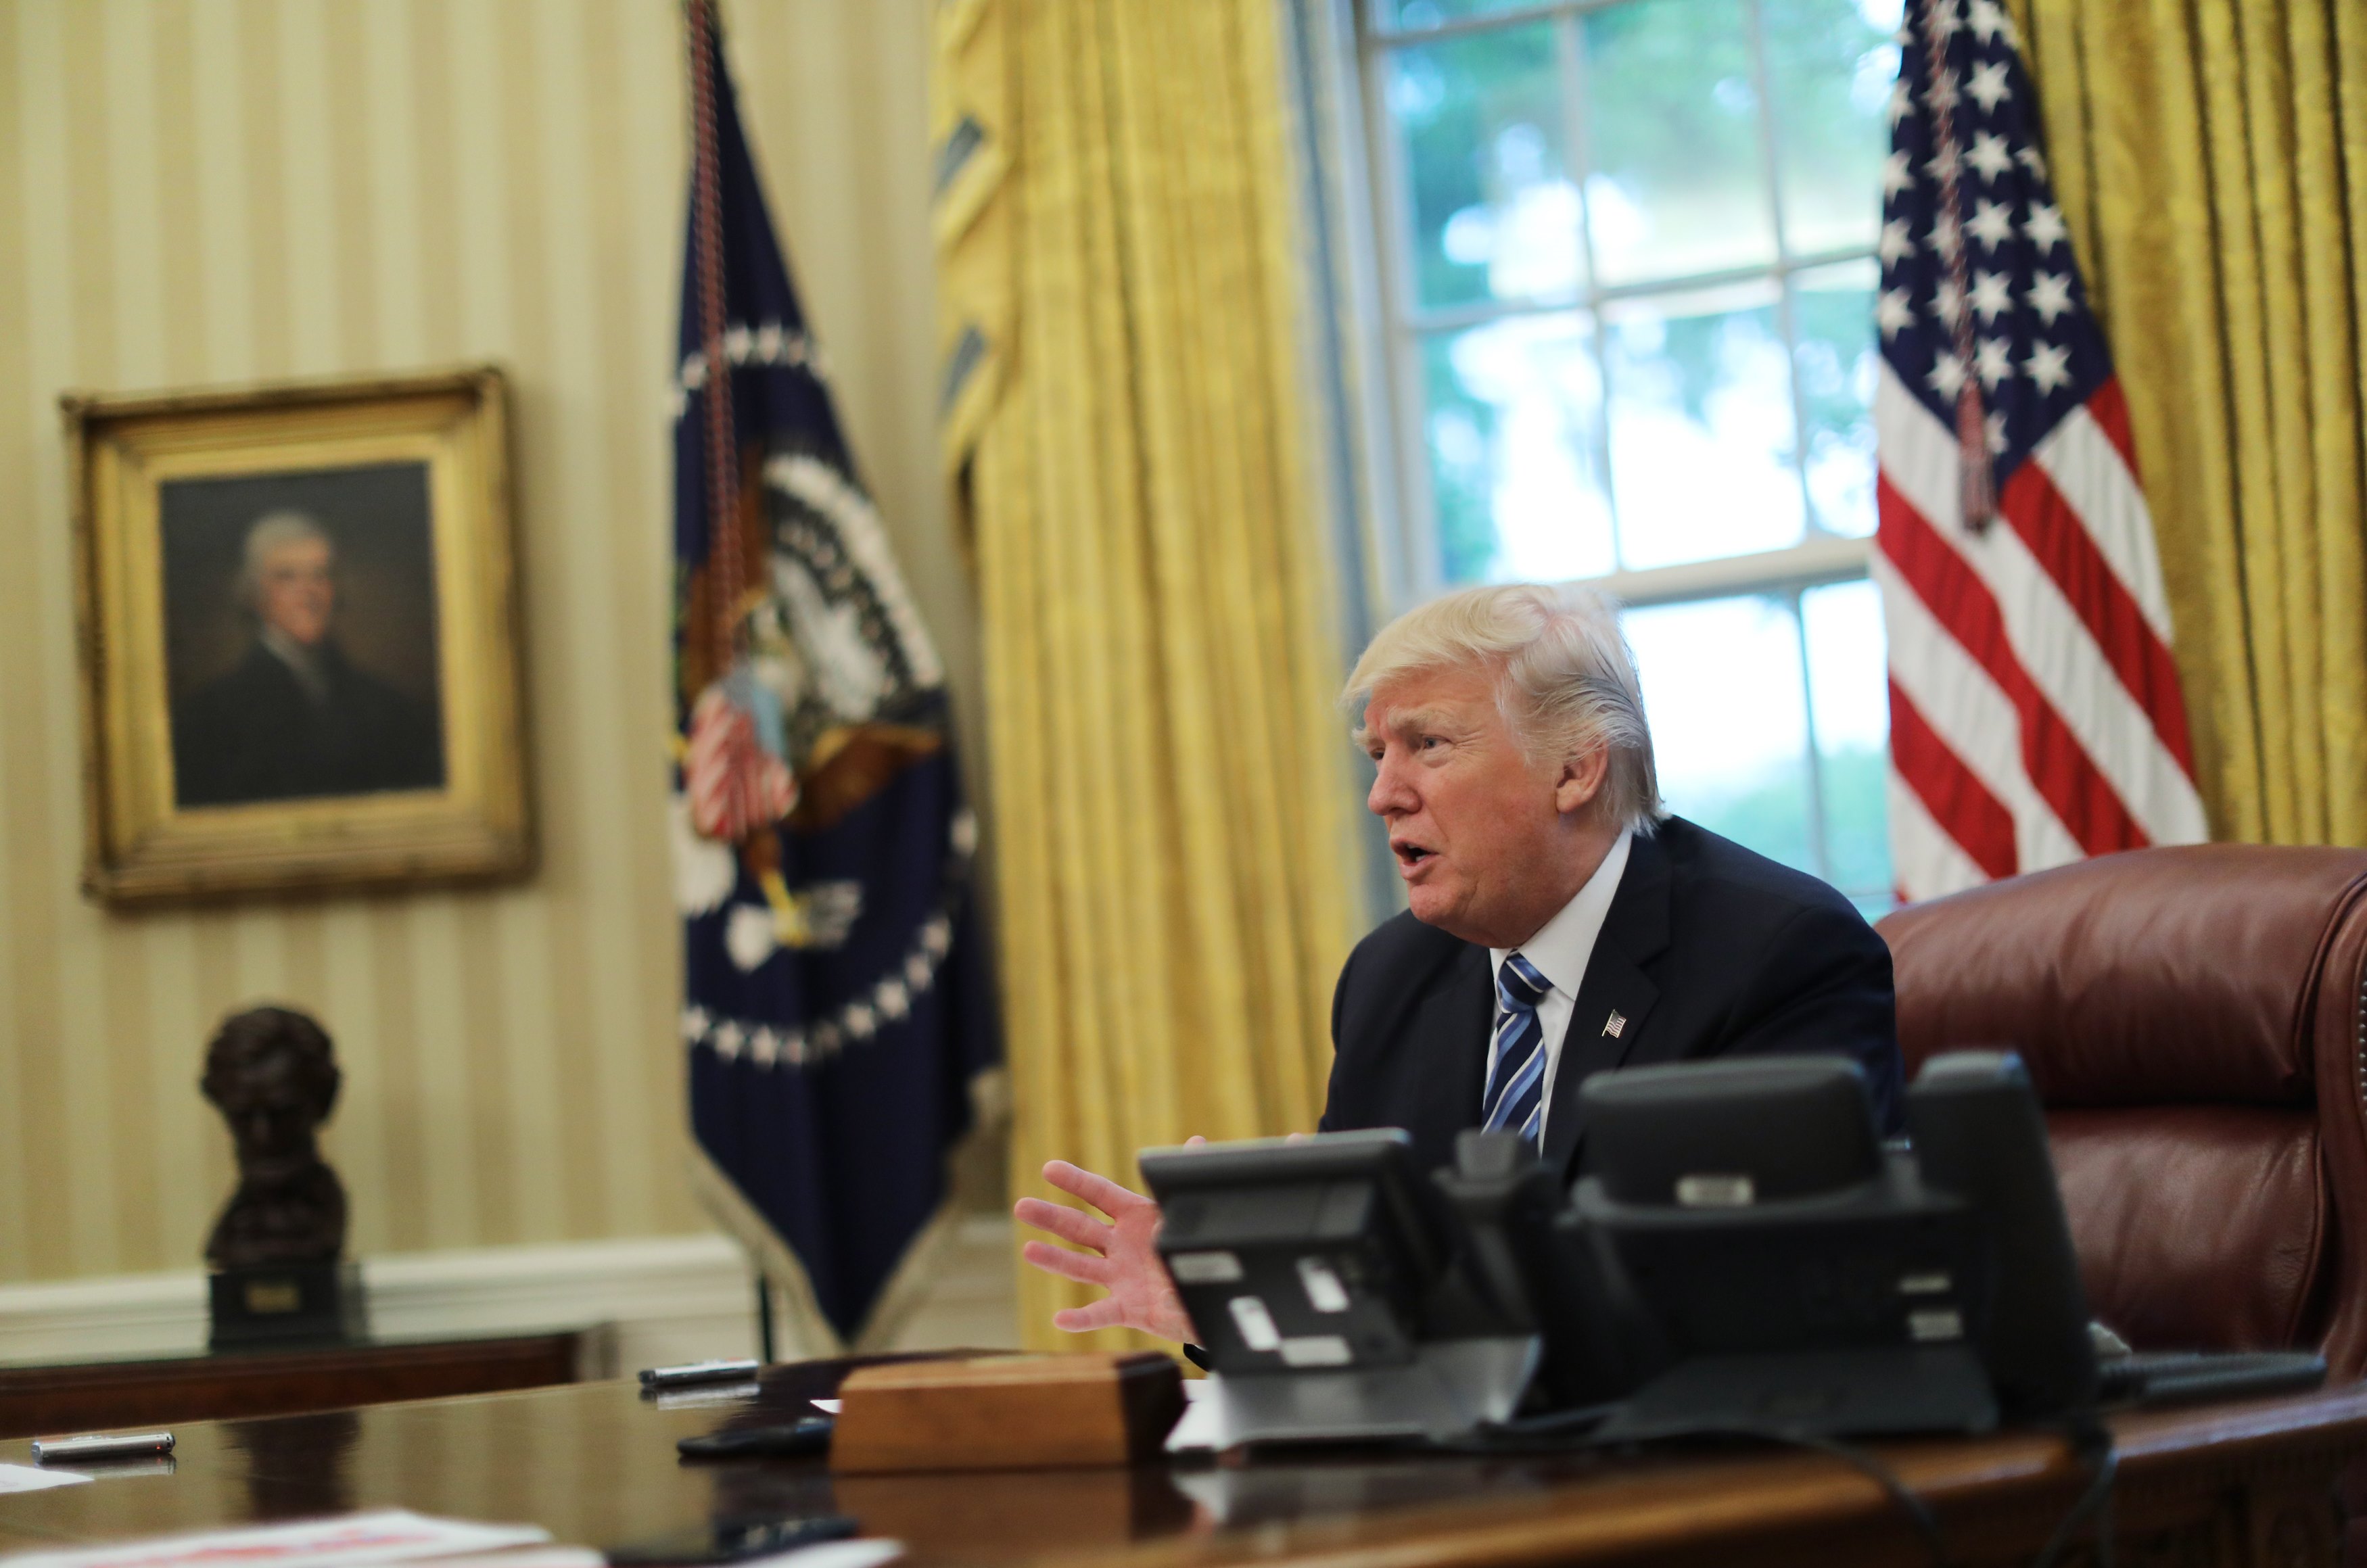 U.S. President Donald Trump speaks during an interview with Reuters in the Oval Office of the White House. (Carlos Barria / Reuters)